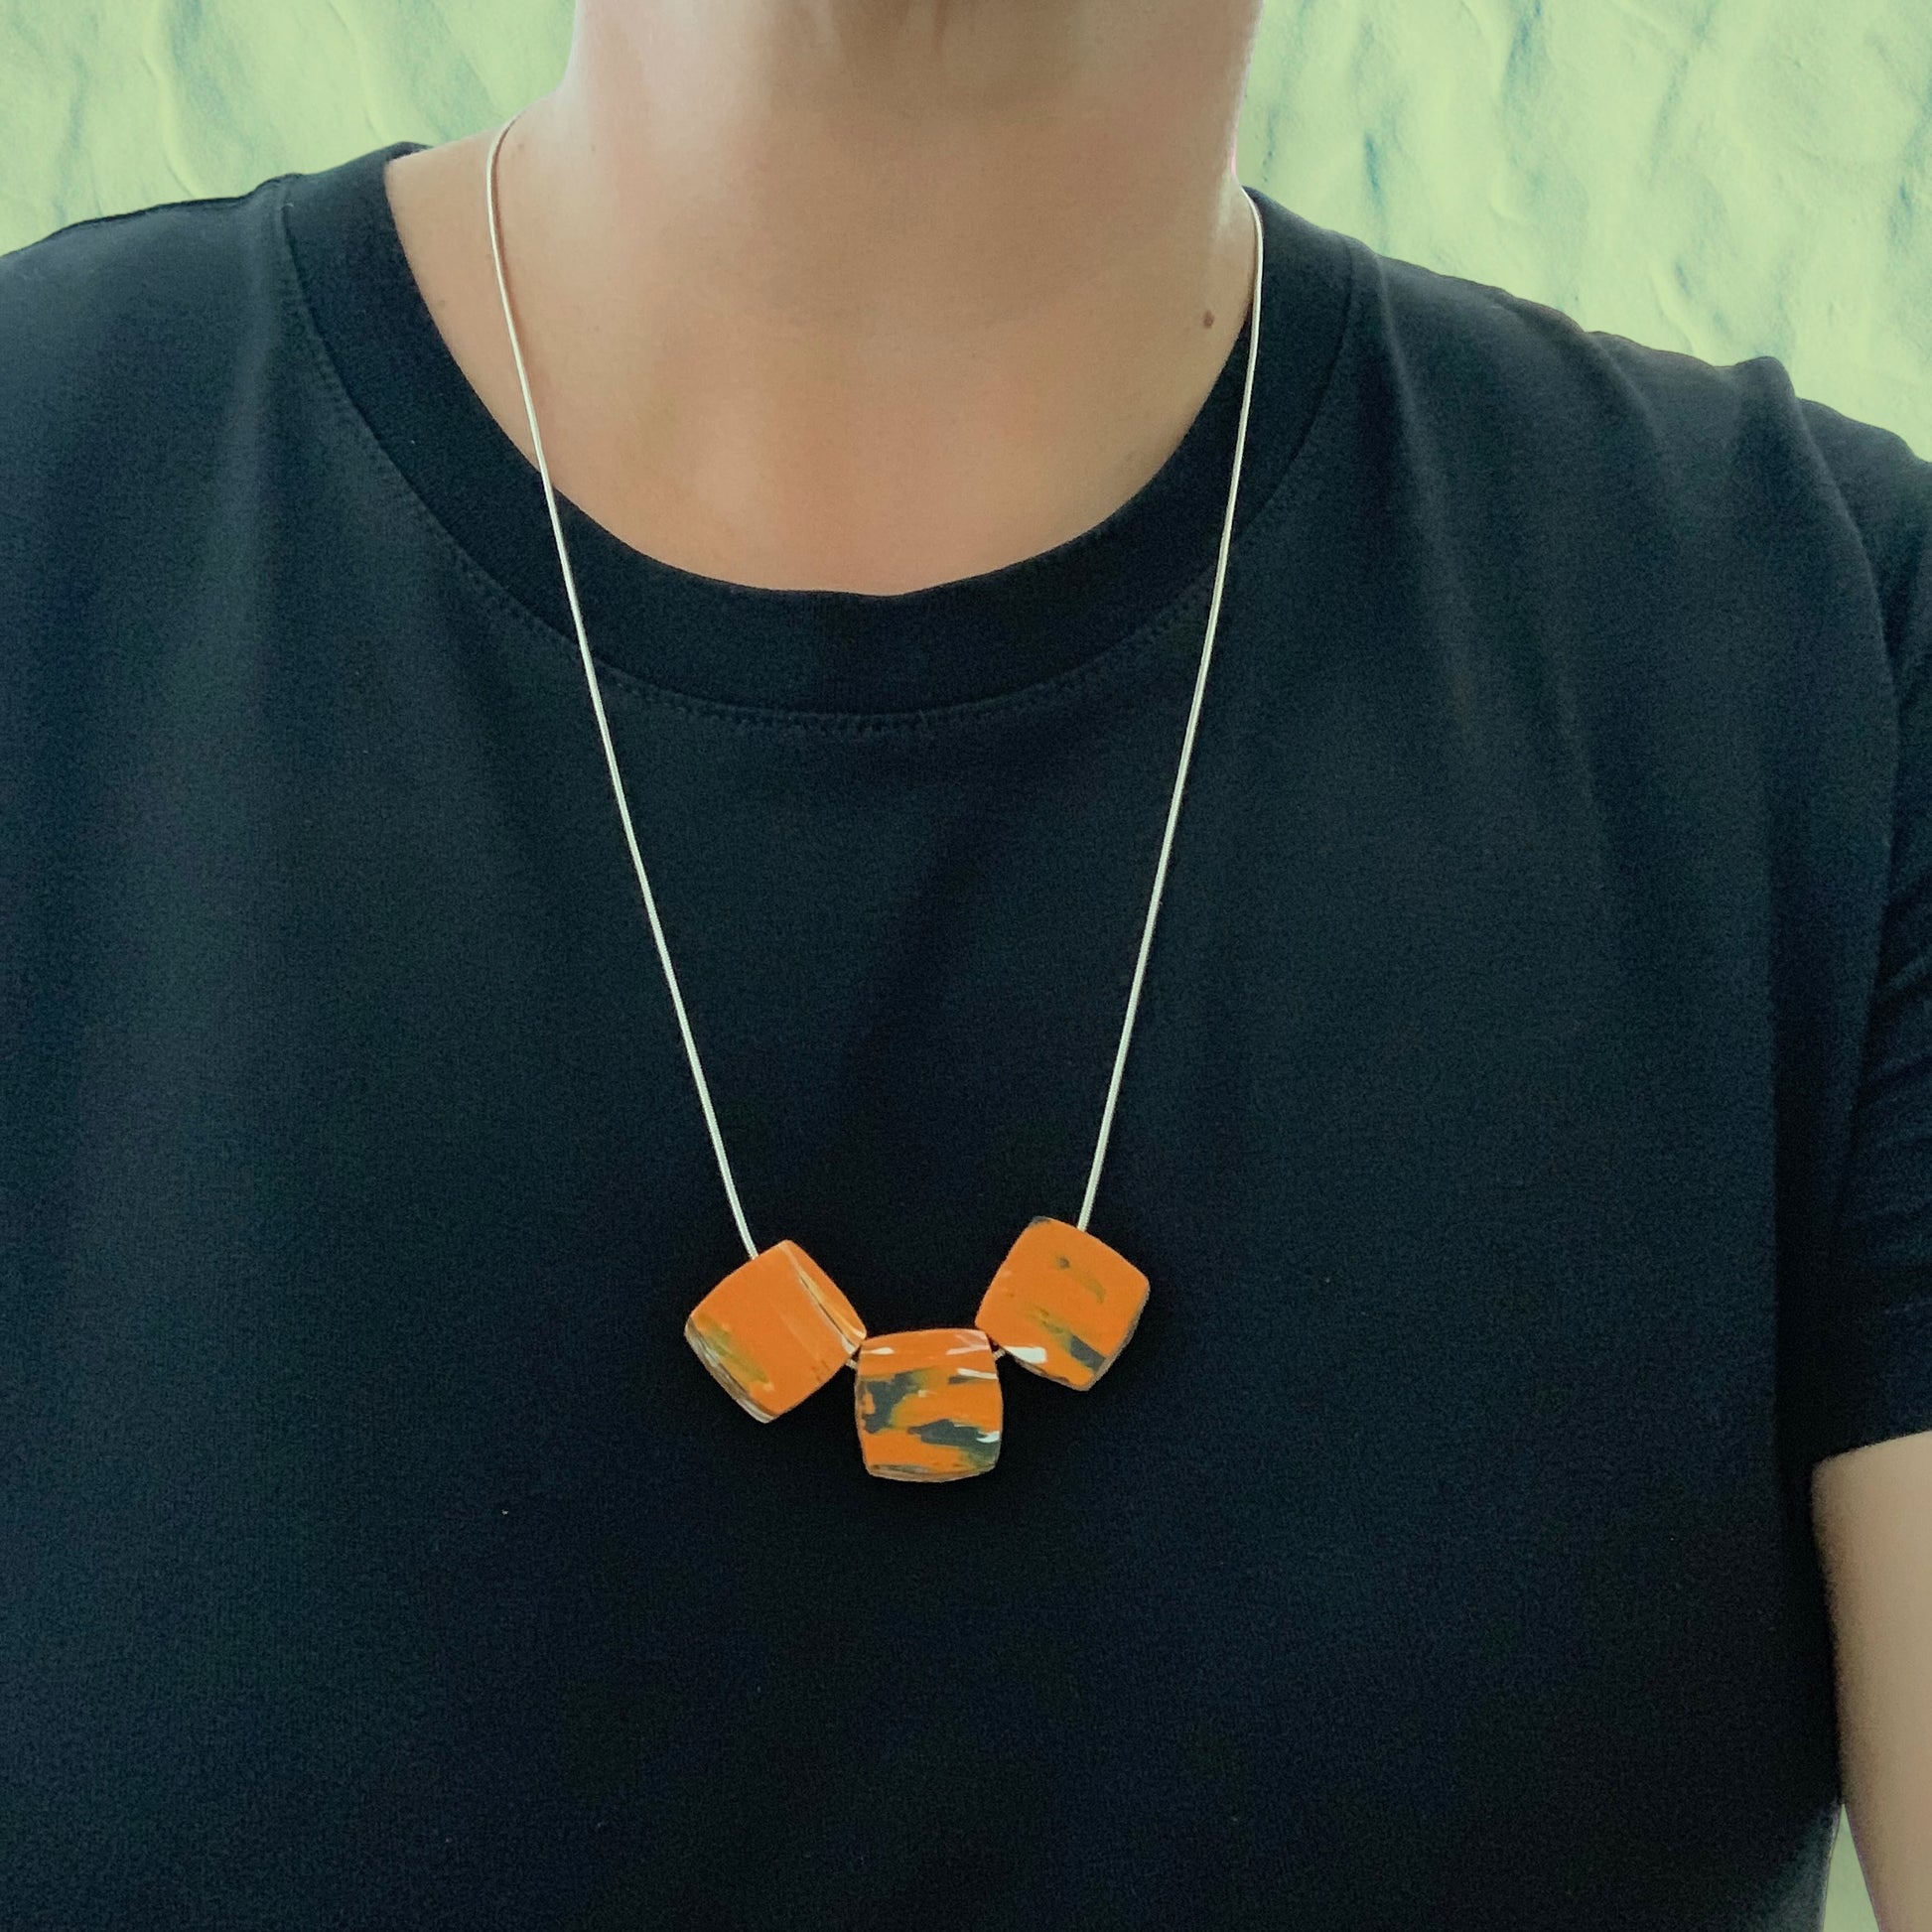 Perfect gift orange square necklace handmade from recycled plastic in London gift for her